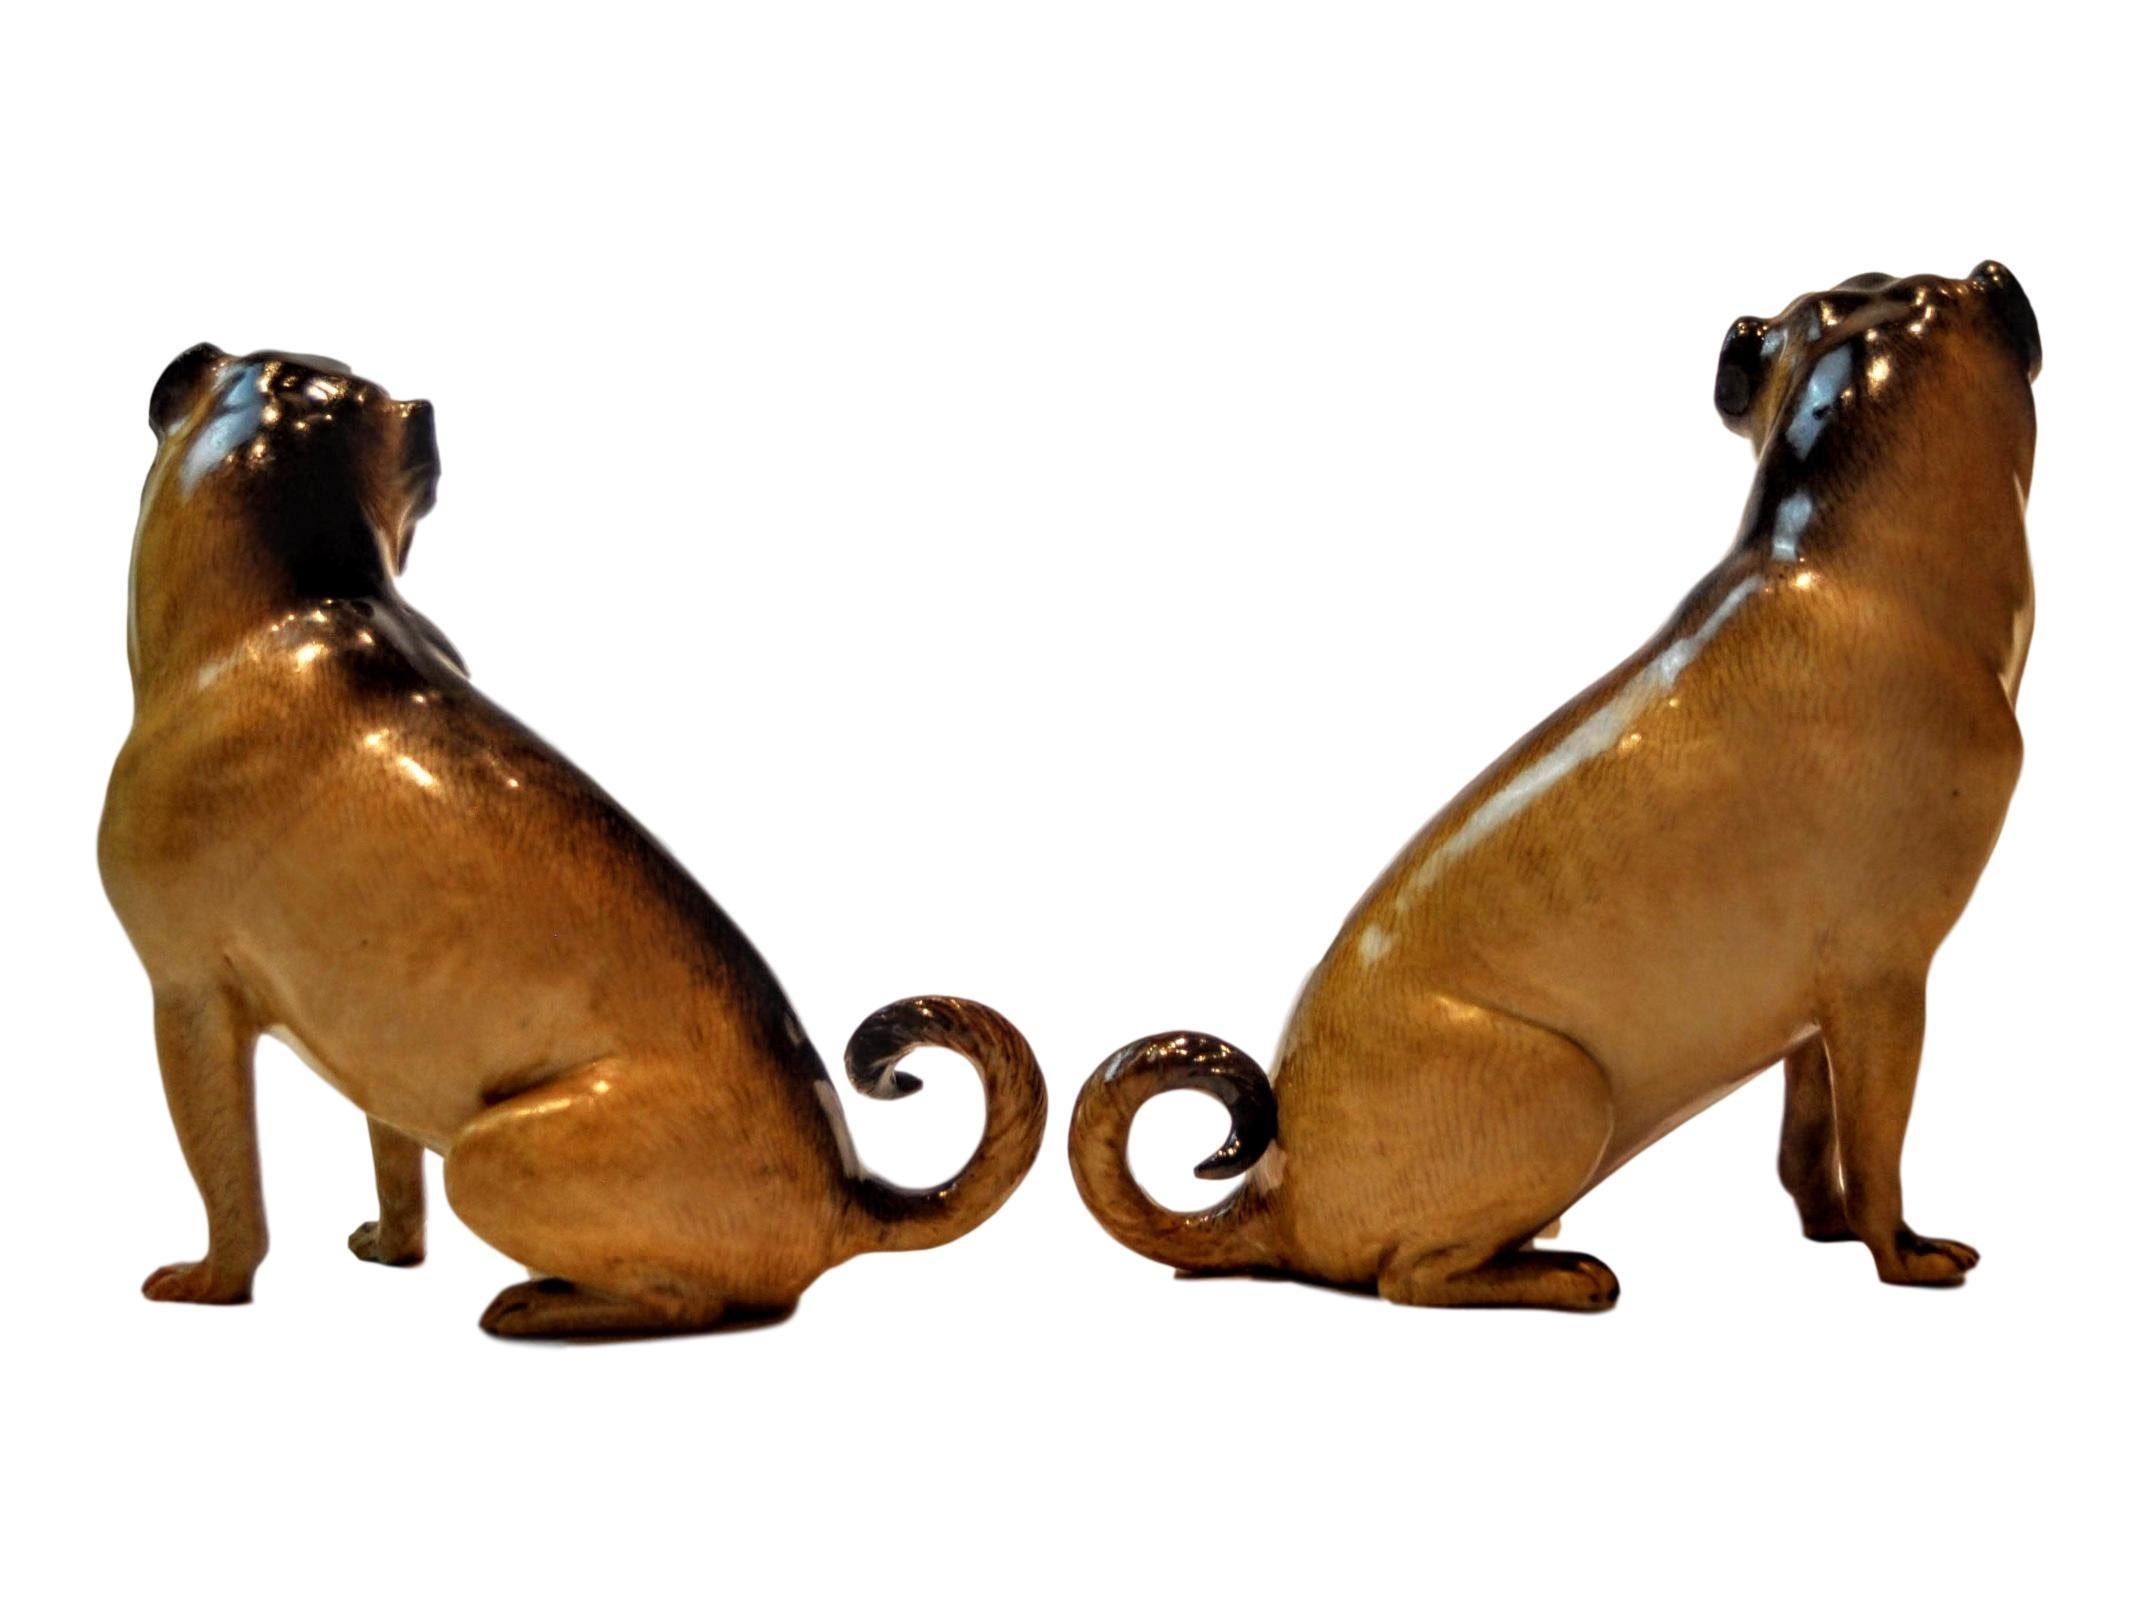 Rare pair of 19th century Meissen Porcelain pug dog figures made in Germany. Hand painted mirrored pair in great condition, very life like. Repair has been made to one paw. Marked on bottom with blue Meissen sword.